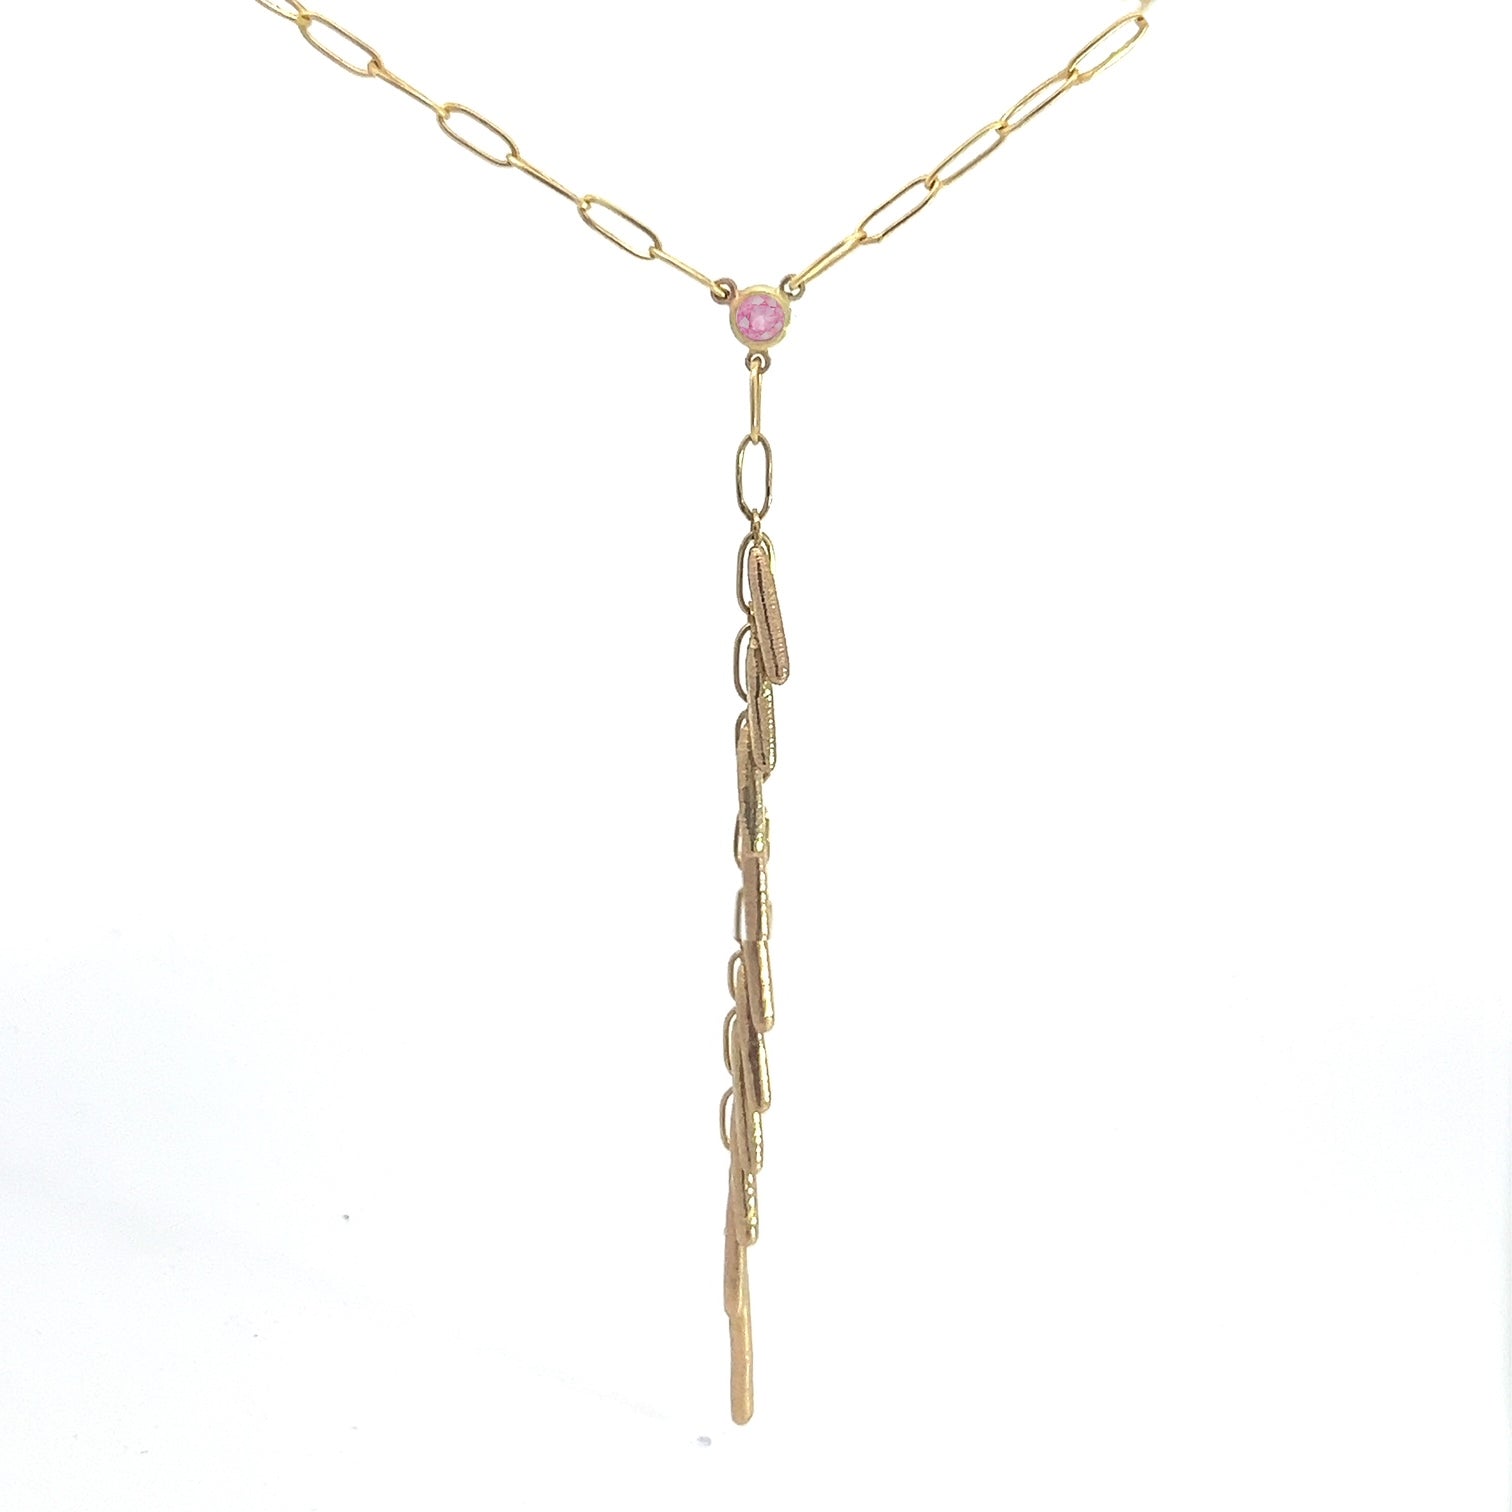 Golden waterfall necklace